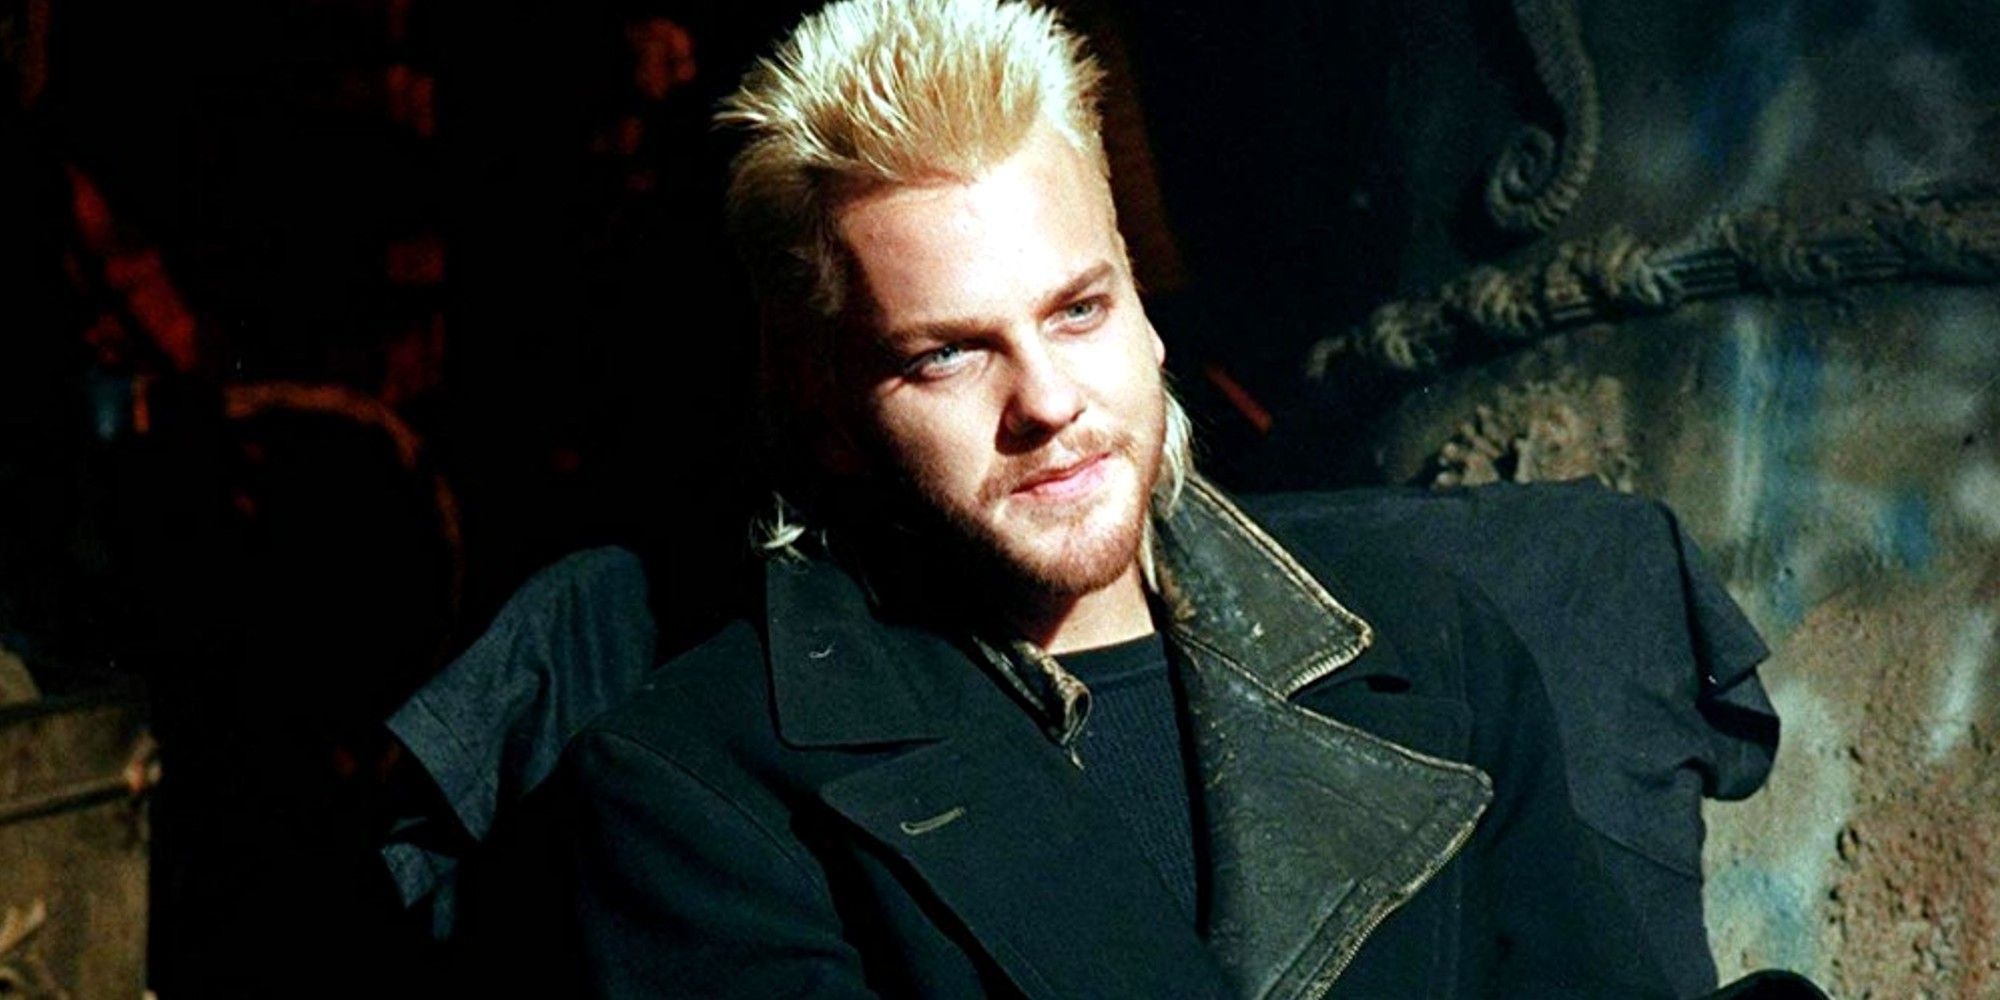 Kiefer Sutherland as David smiling in The Lost Boys 